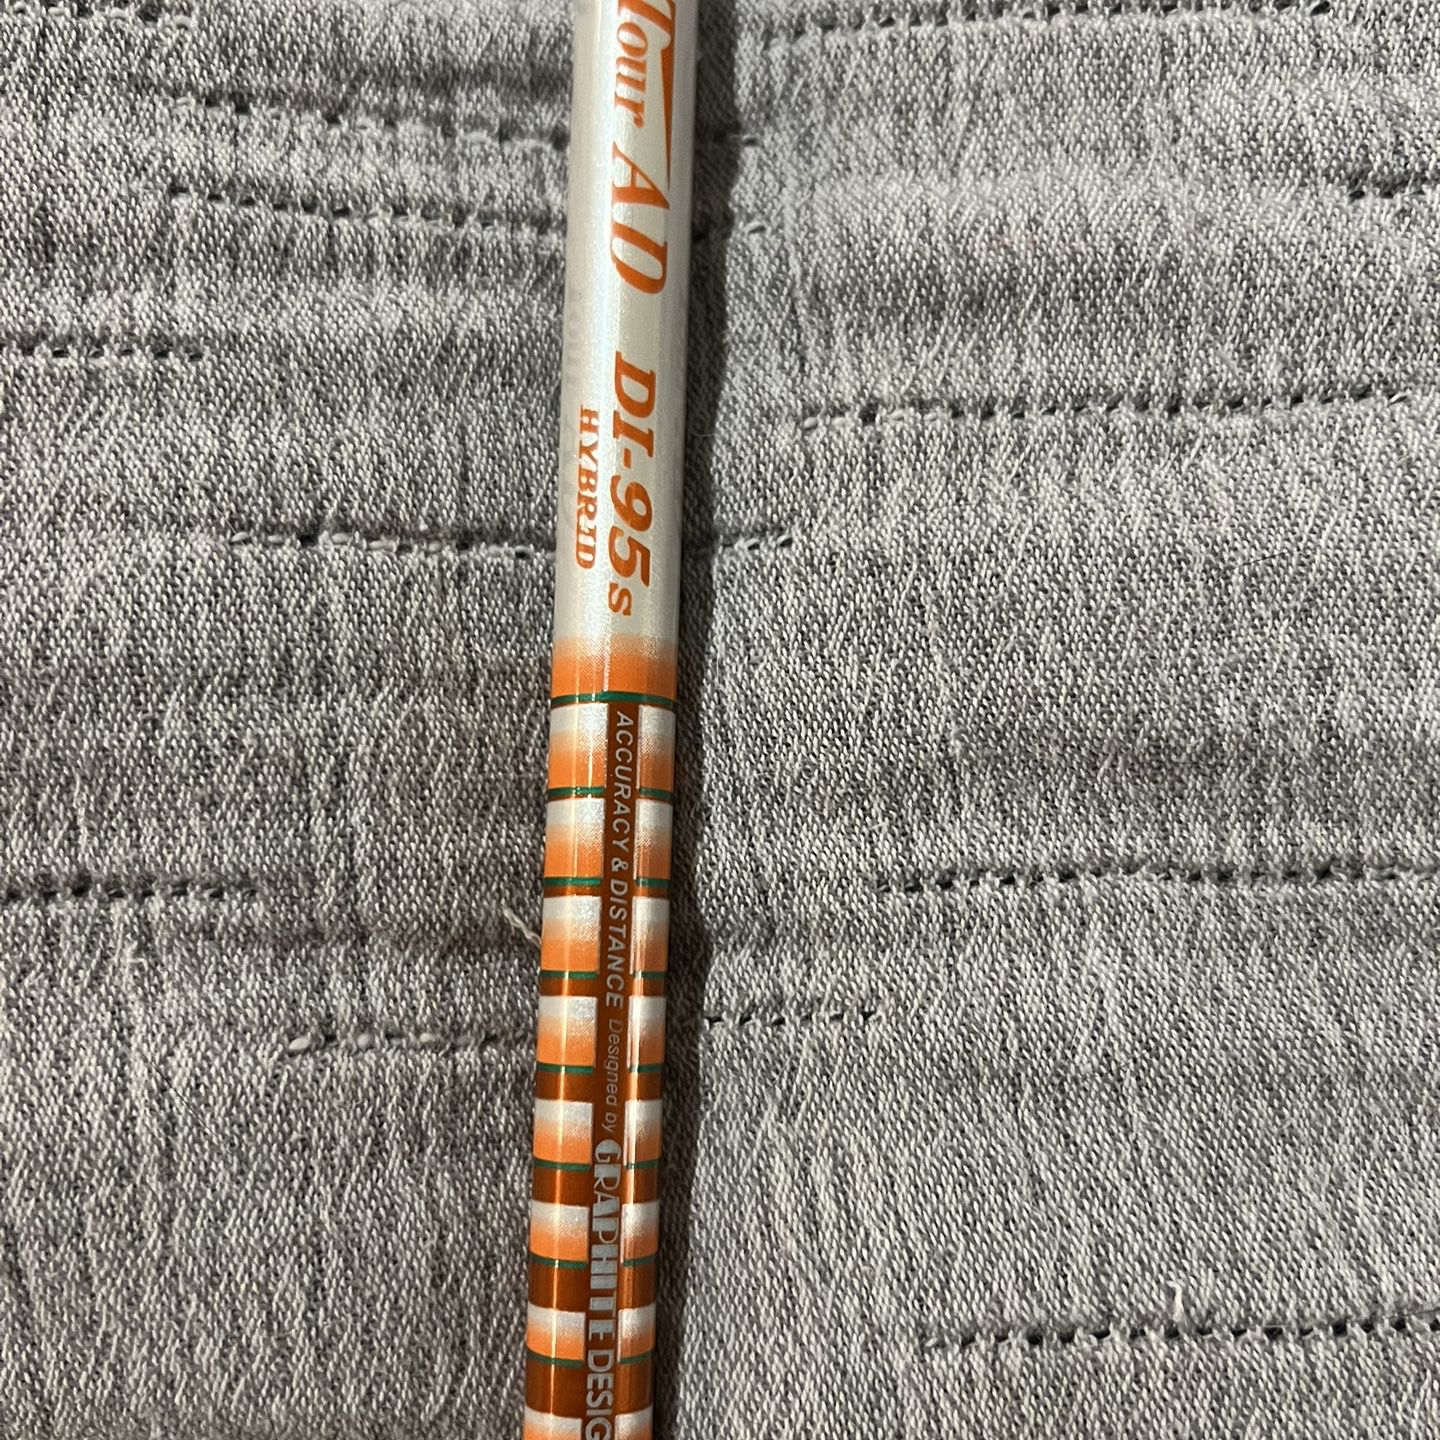 Tour AD DI-95S Shaft and Rescue/Hybrid Wood